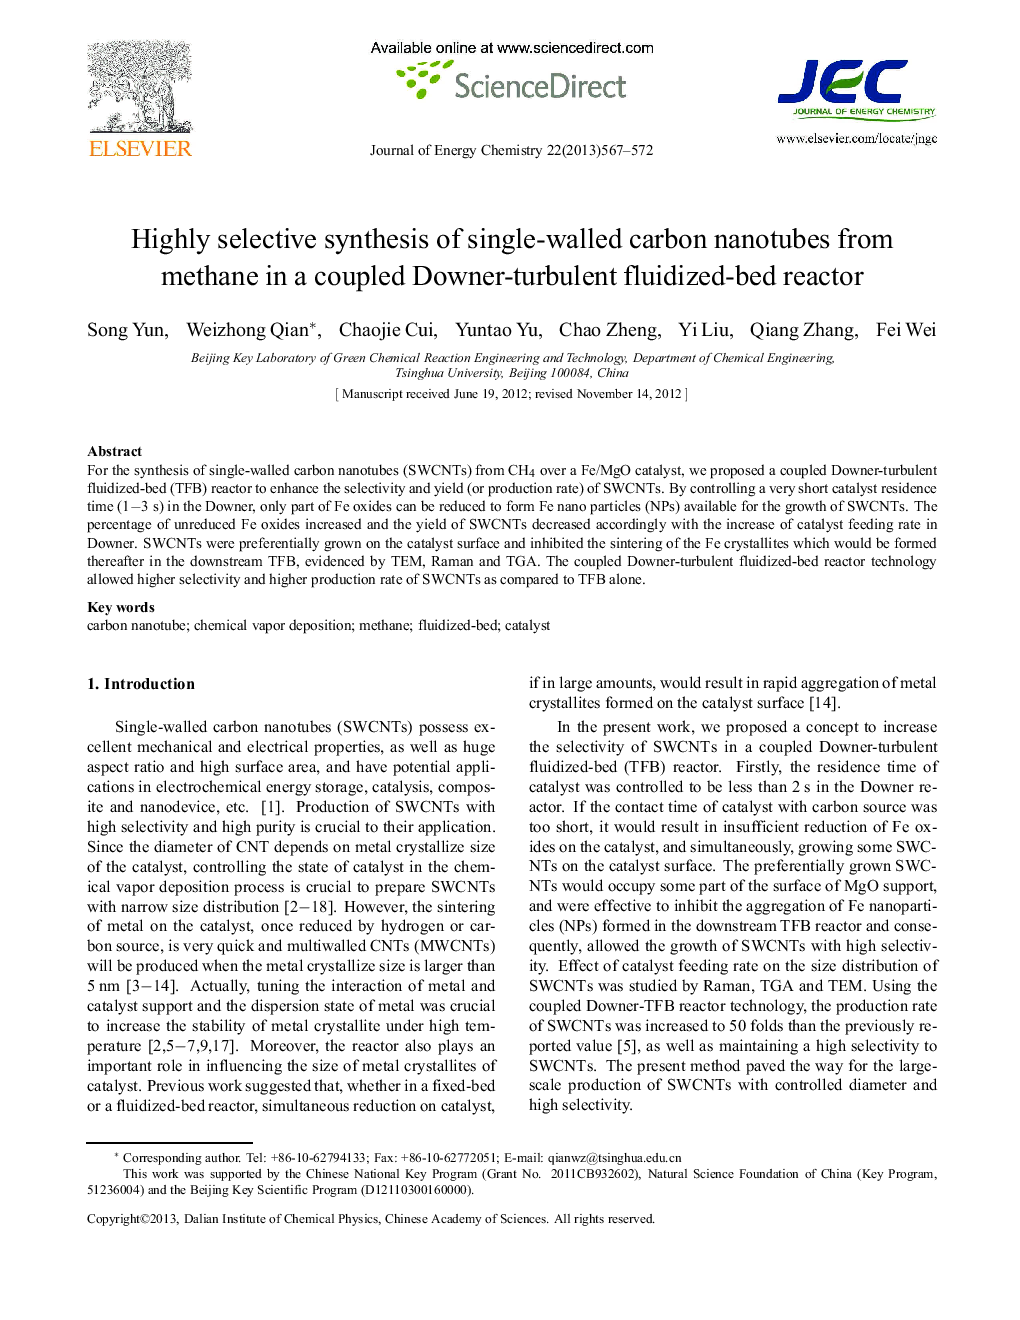 Highly selective synthesis of single-walled carbon nanotubes from methane in a coupled Downer-turbulent fluidized-bed reactor 